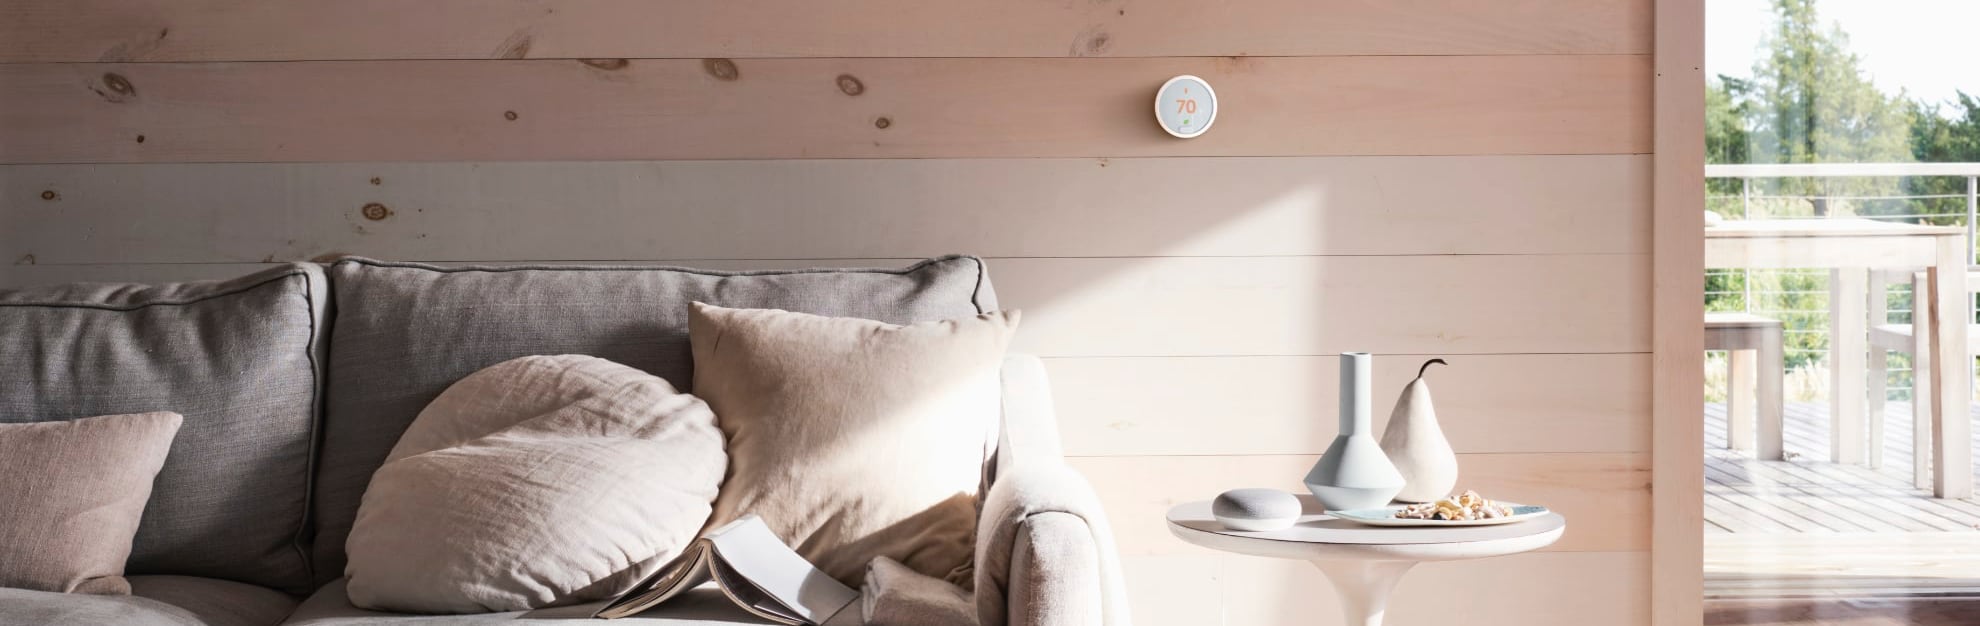 Vivint Home Automation in Fayetteville